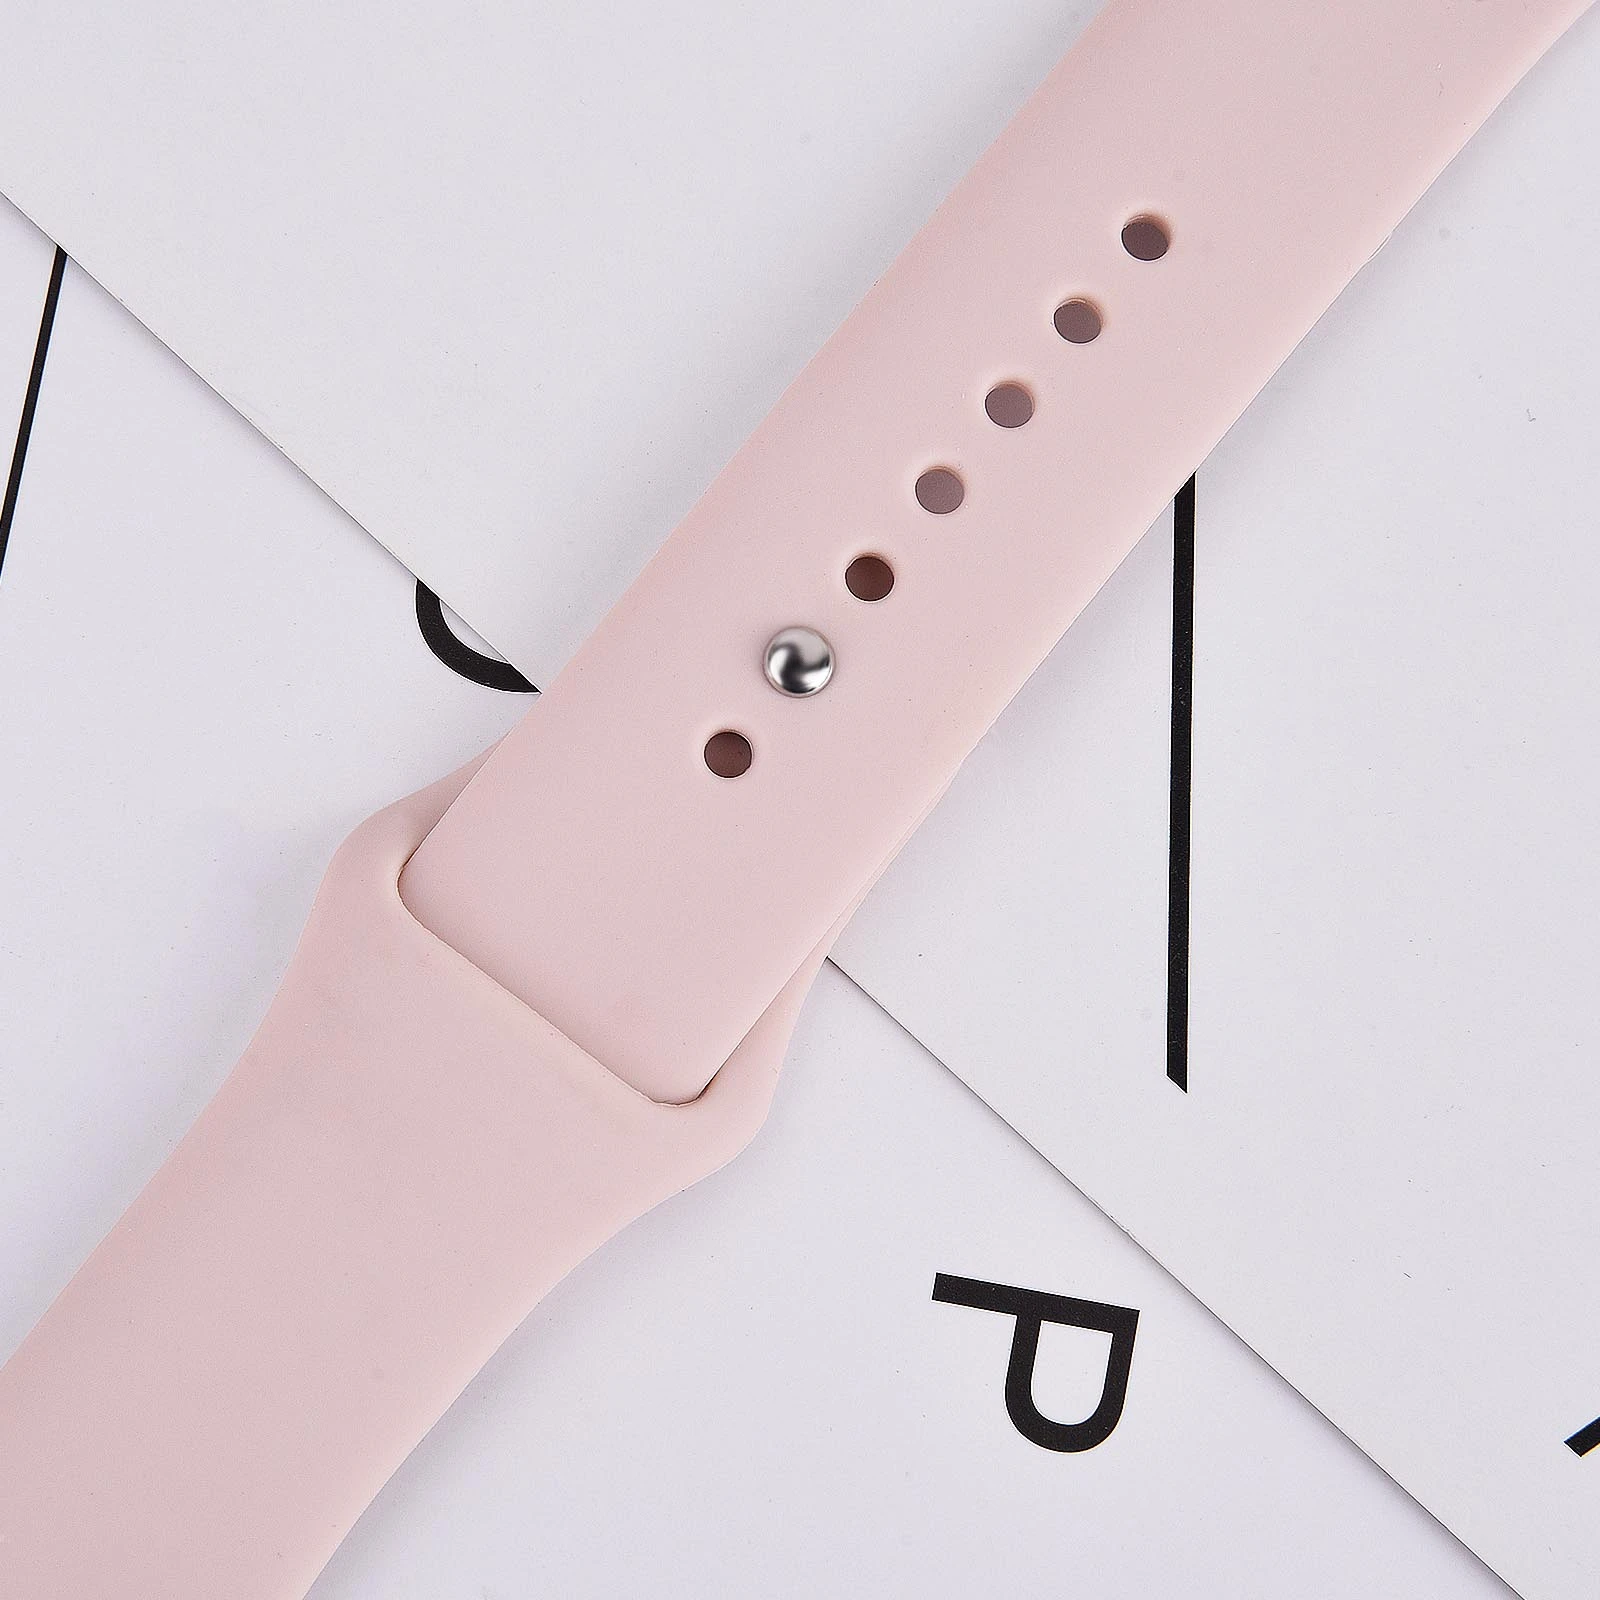 2020 Fashion Hot Sale Silicone Sport Band For Apple Watch Series 3 4 5 6/SE  38mm 40mm 42mm 44mm